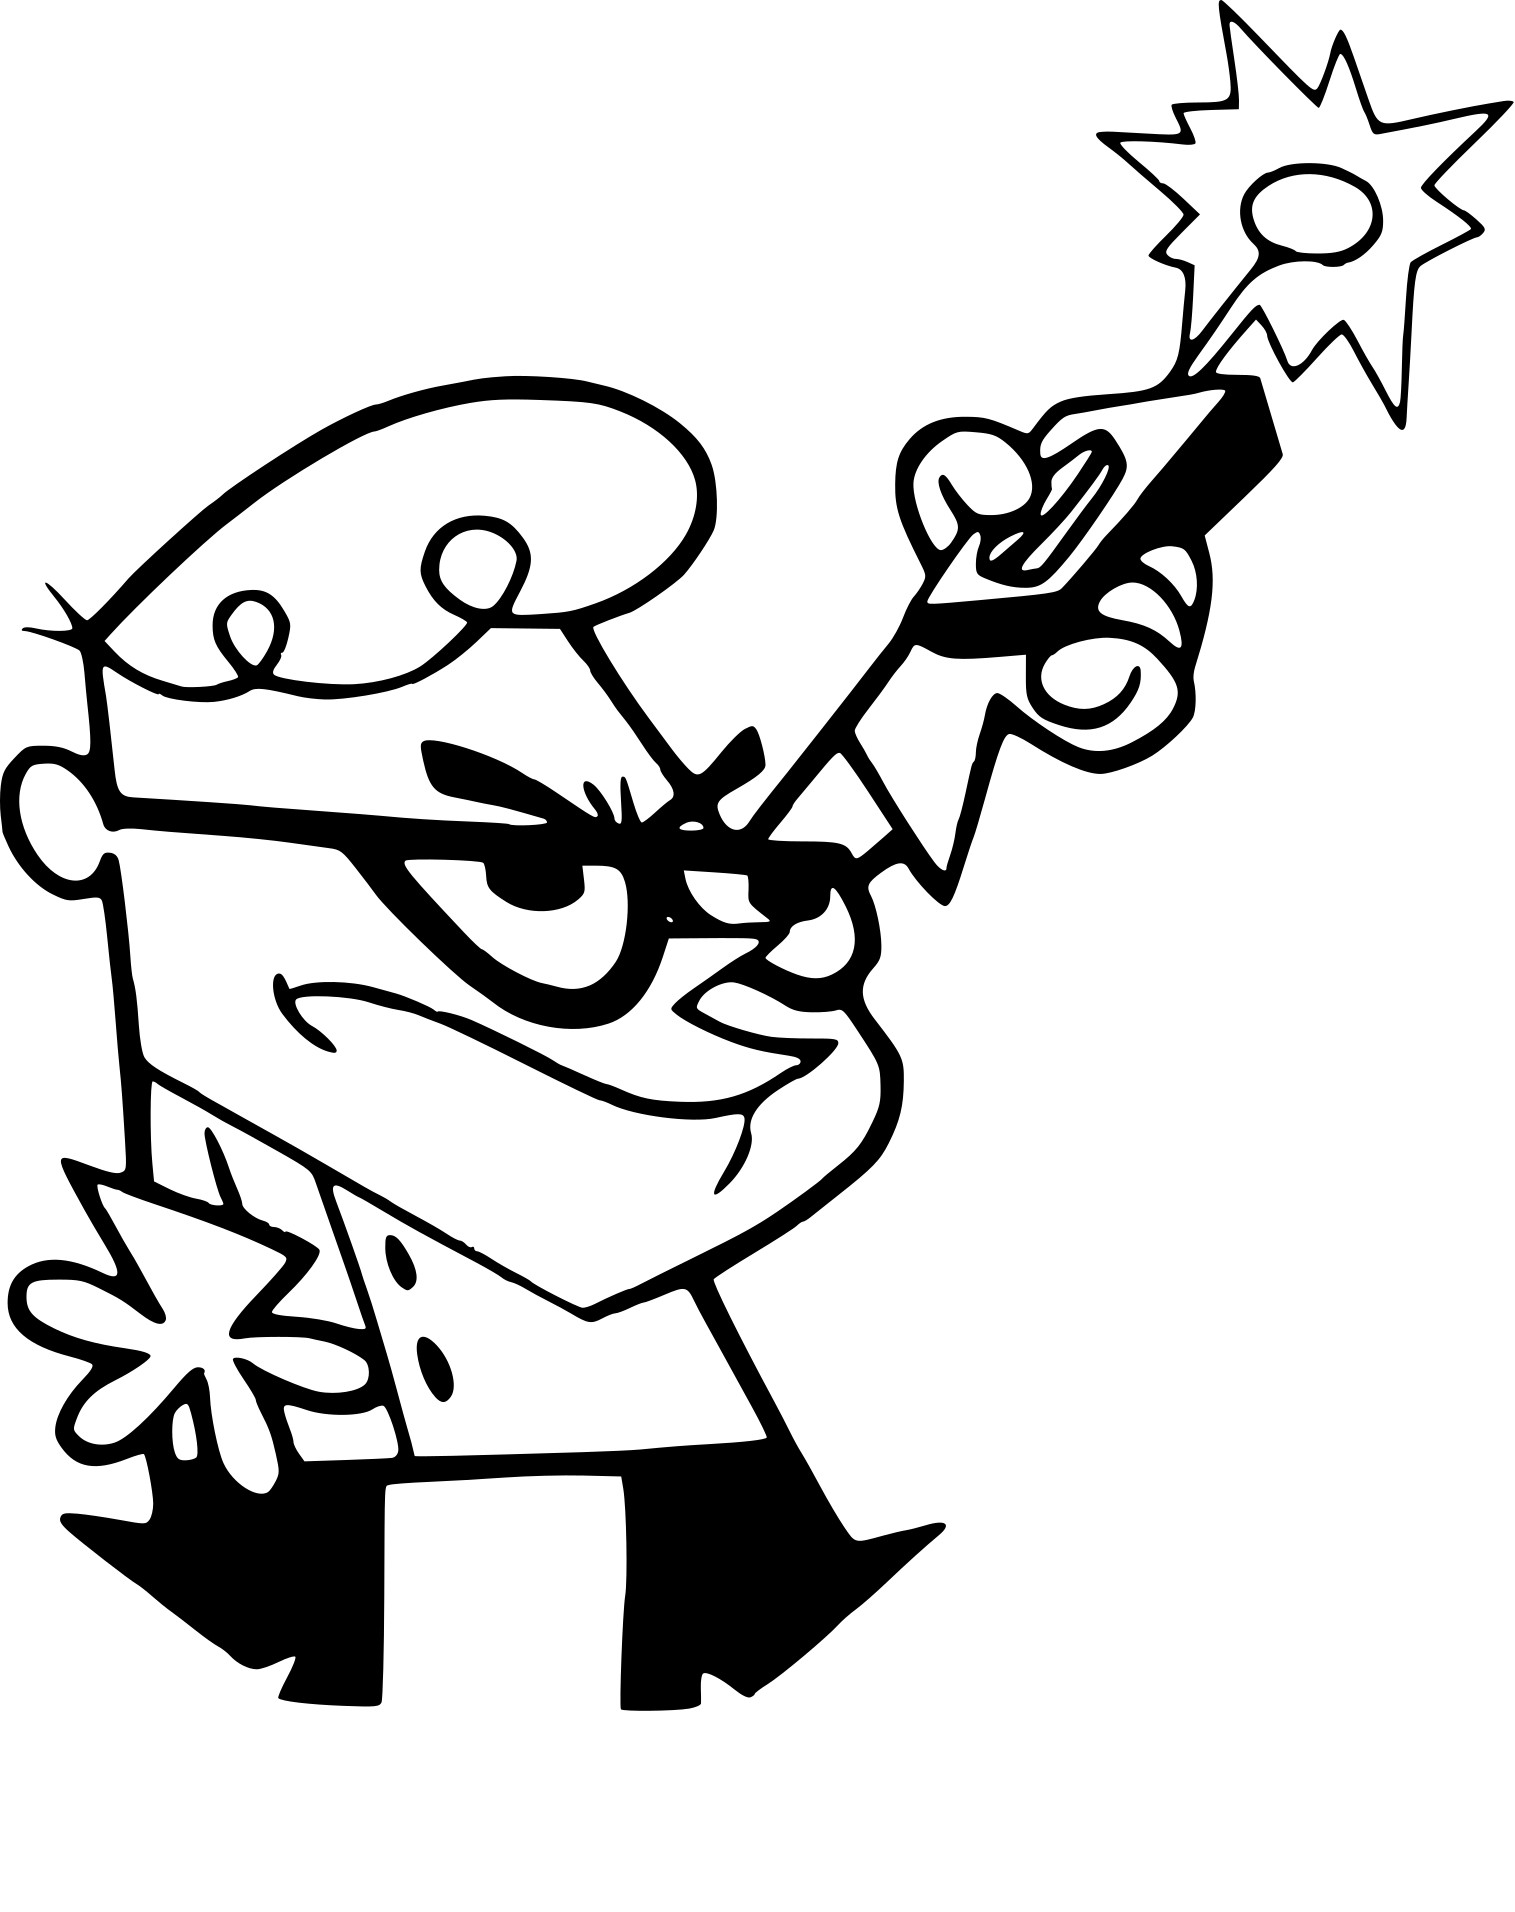 Dexter drawing and coloring page